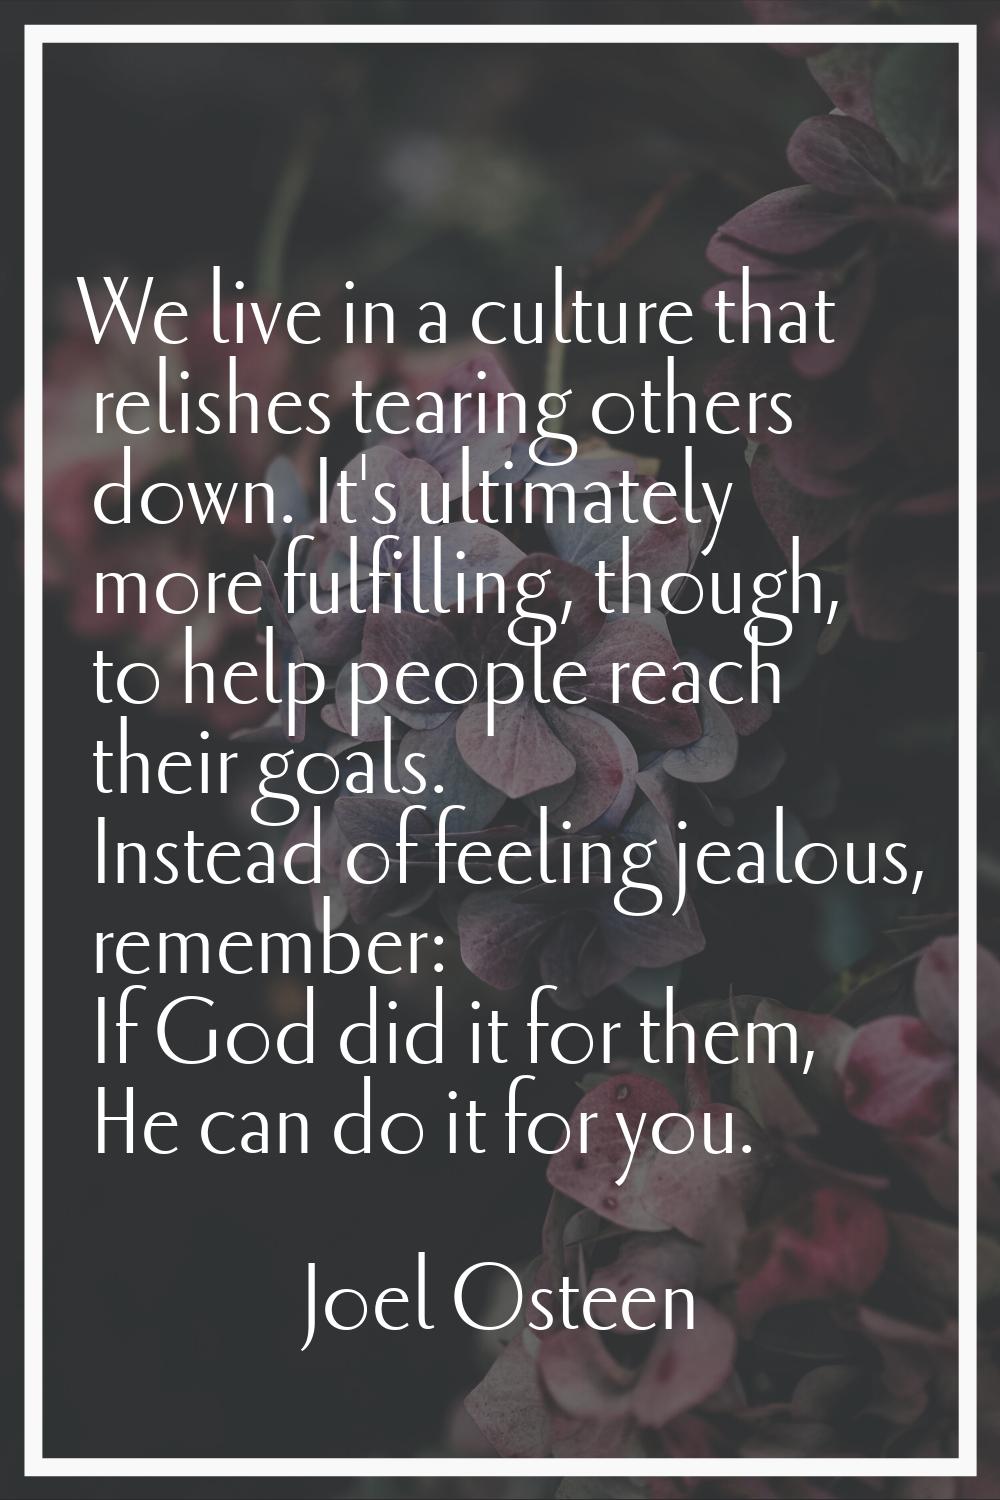 We live in a culture that relishes tearing others down. It's ultimately more fulfilling, though, to